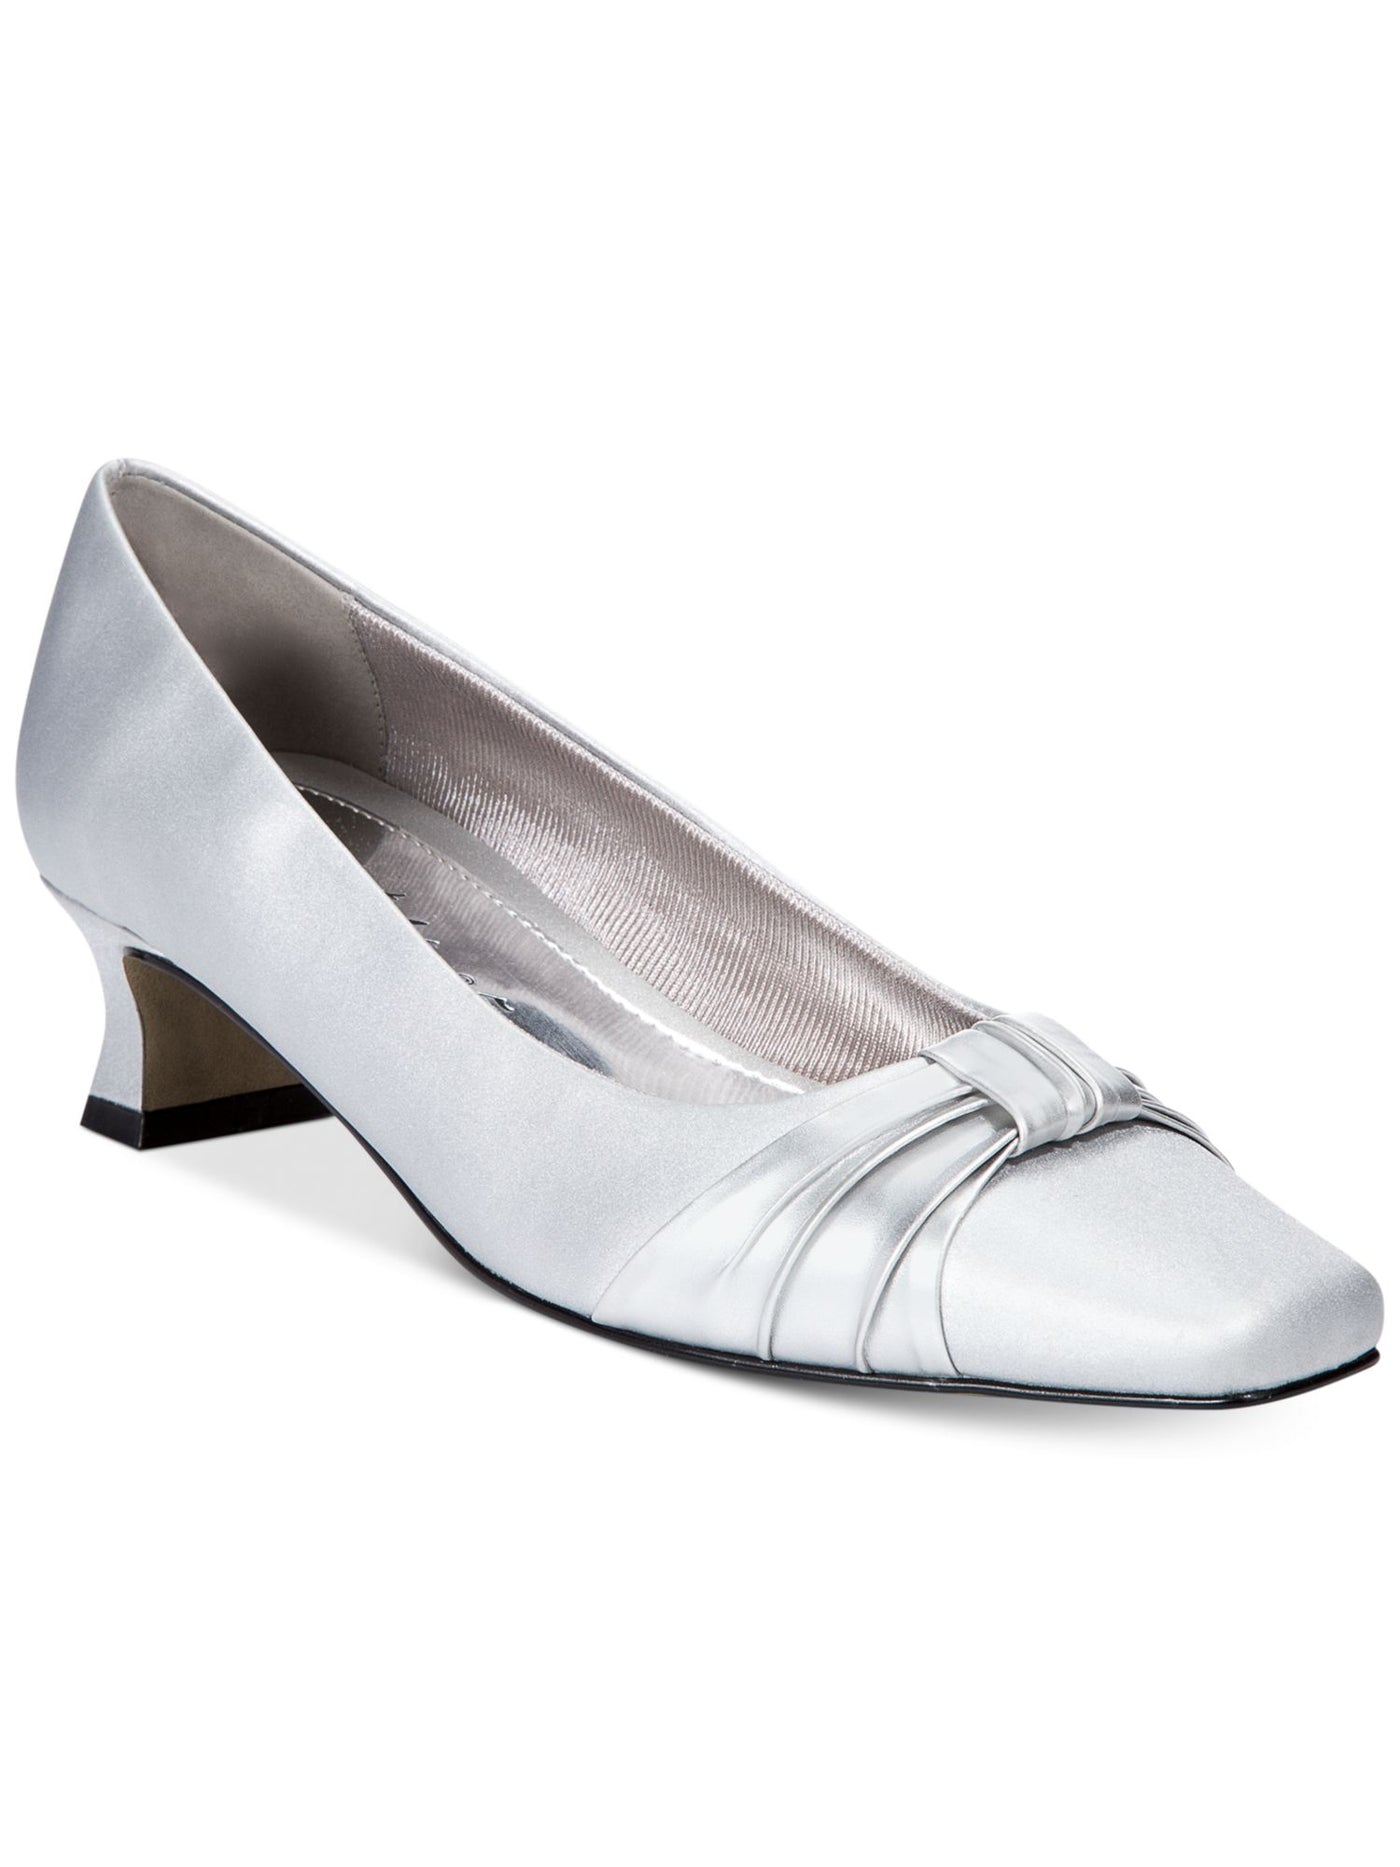 EASY STREET ALIVE AT 5 Womens Silver Bow Accent Padded Waive Square Toe Flare Slip On Pumps Shoes 9 M